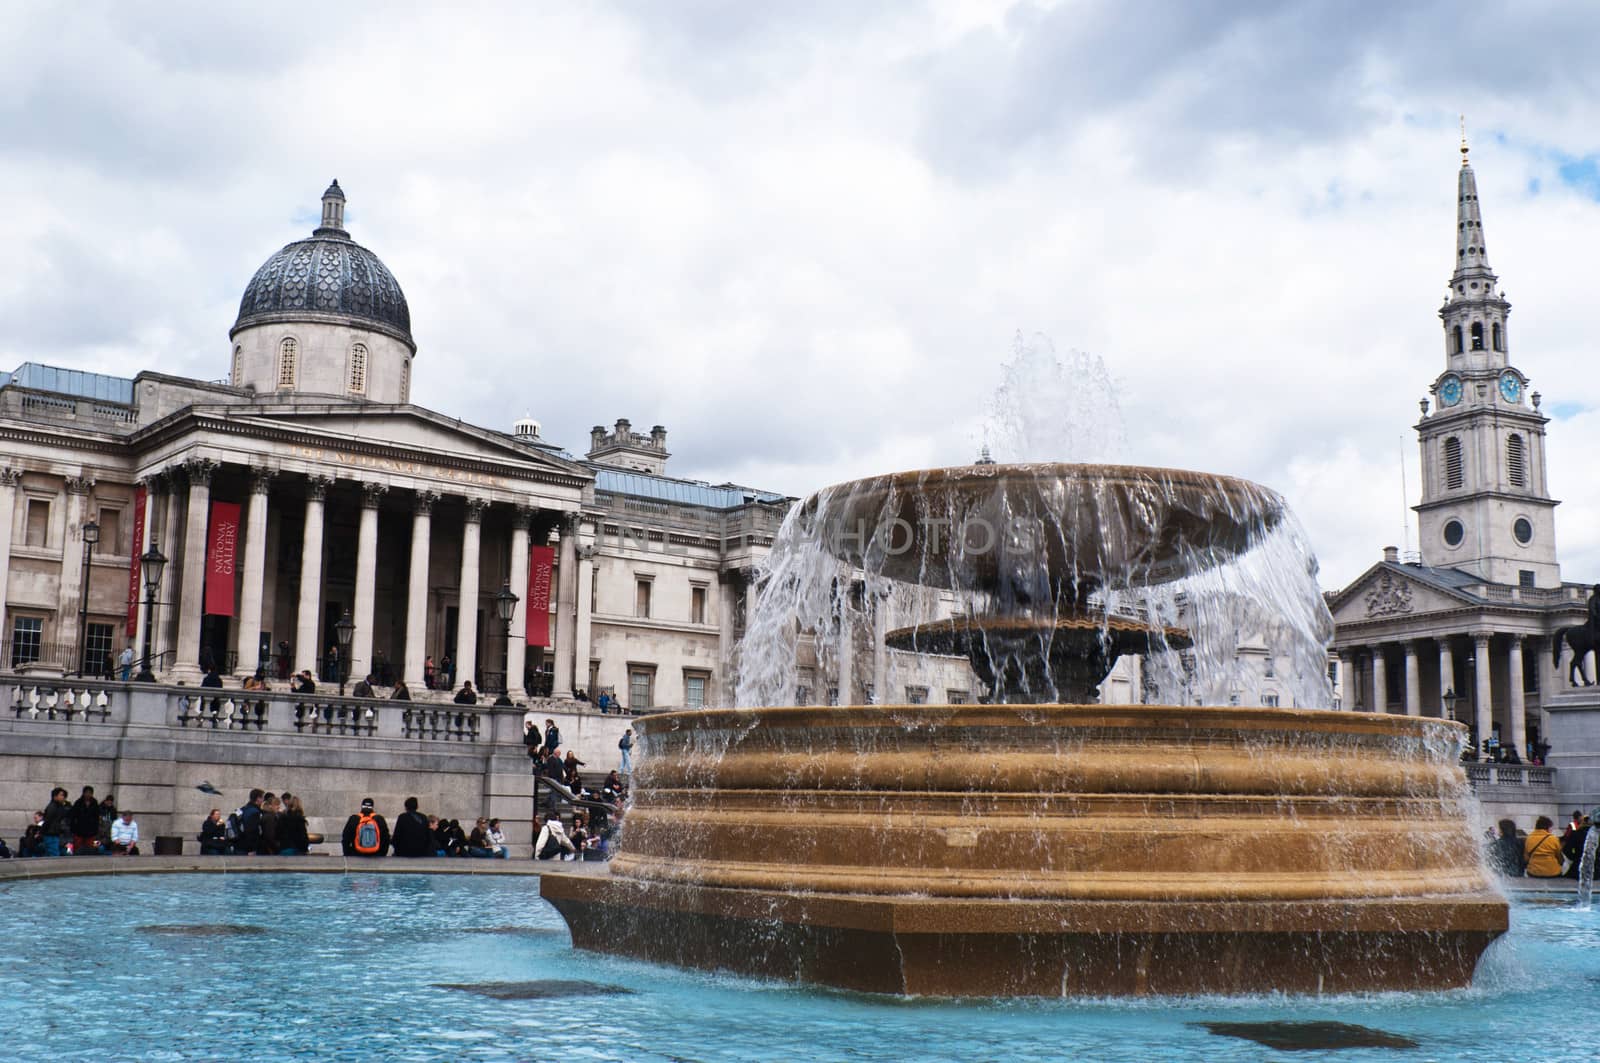 Trafalgar Square in London with National Gallery and fountains